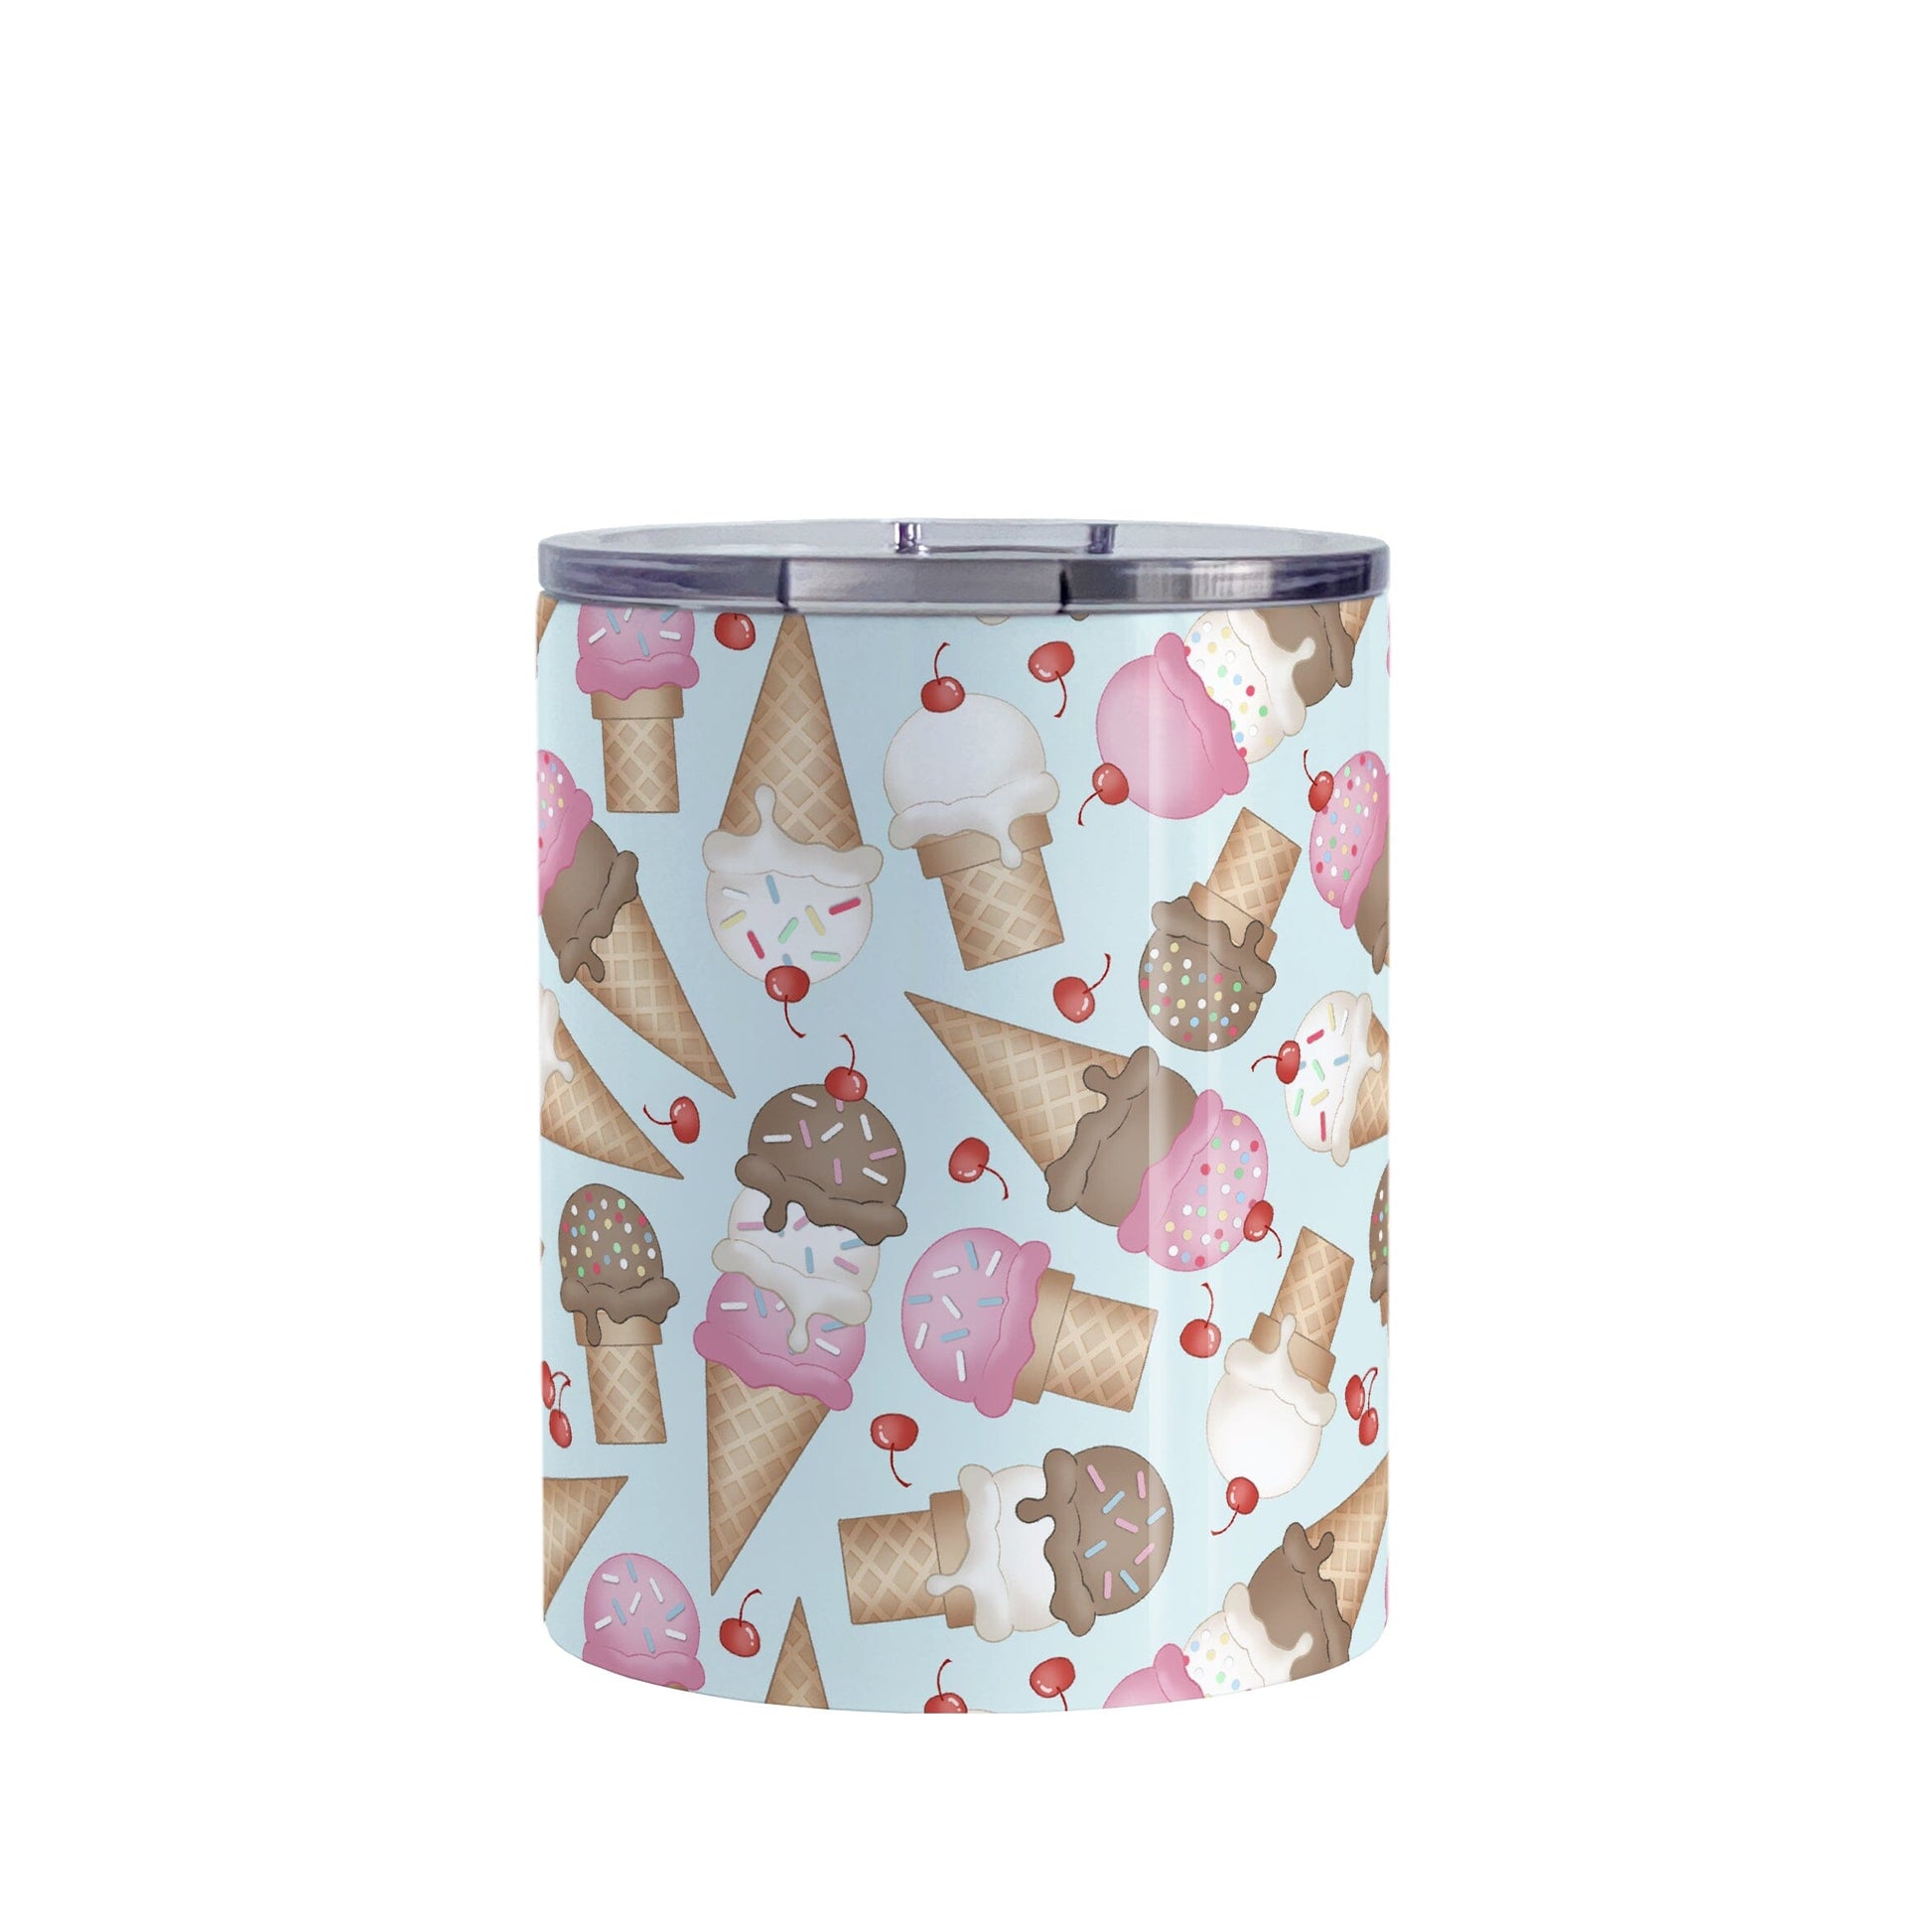 Ice Cream Cones Pattern Tumbler Cup (10oz) at Amy's Coffee Mugs. A stainless steel tumbler cup printed with a design of hand-drawn ice cream cones with chocolate, strawberry, and vanilla scoops, with sprinkles and cherries, over a pale blue color, in a pattern that wraps around the cup.